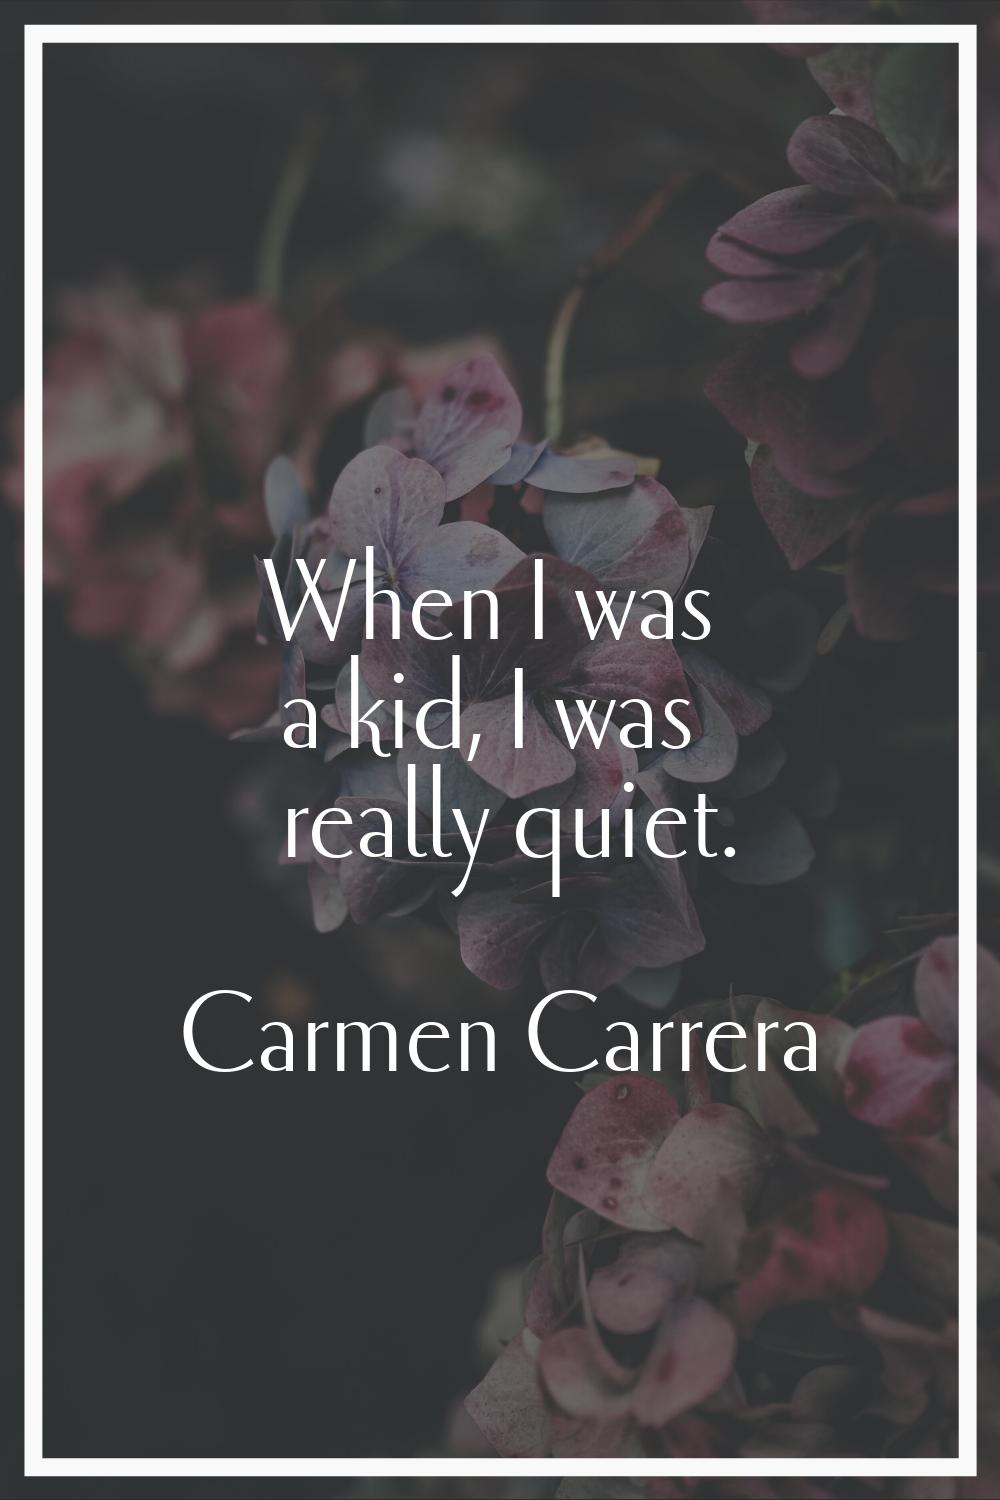 When I was a kid, I was really quiet.